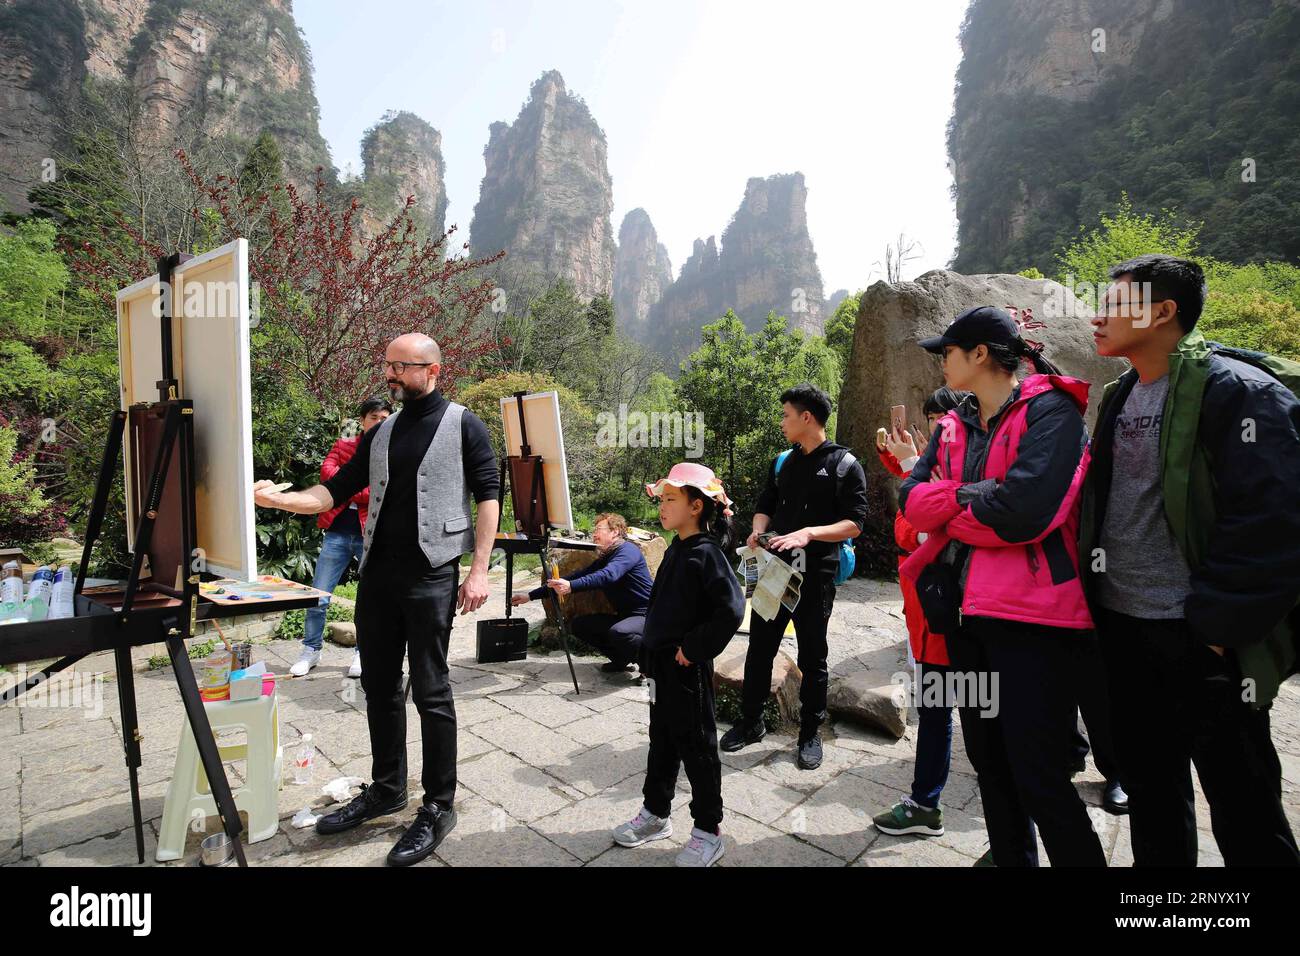 (180407) -- ZHANGJIAJIE, April 7, 2018 -- Giorgio Distefano (1st L) from Italy paints at Zhangjiajie UNESCO Global Geopark at Wulingyuan District of Zhangjiajie City, central China s Hunan Province, April 6, 2018. About 21 artists coming from Italy took part in a cultural event at the geopark which is known for its quartzose sandstone landform. This geopark is one of the geoparks in China that have already been chosen by UNESCO on its World Network of Geoparks. )(wsw) CHINA-HUNAN-ZHANGJIAJIE GEOPARK-ITALIAN ARTISTS (CN*) WuxYongbing PUBLICATIONxNOTxINxCHN Stock Photo